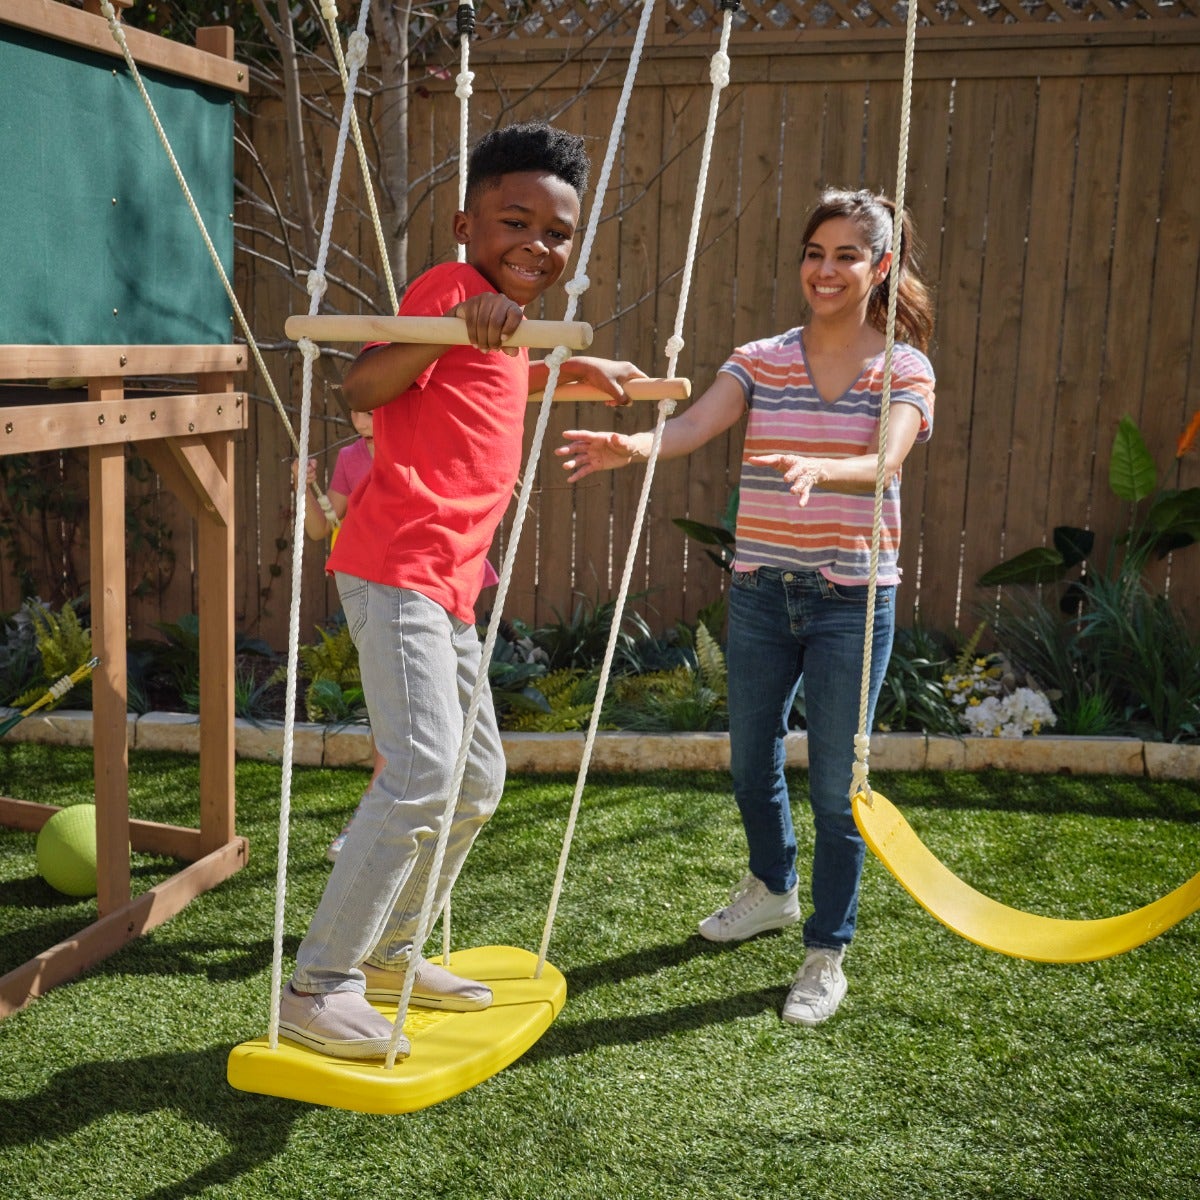 Surf's Up: Besides the traditional belt swings, a newly designed surf swing is included for more adventurous types. Stand up and sway back and forth to get total thrills and no wipeouts. All three swings feature soft-touch rope that's easy on the hands.